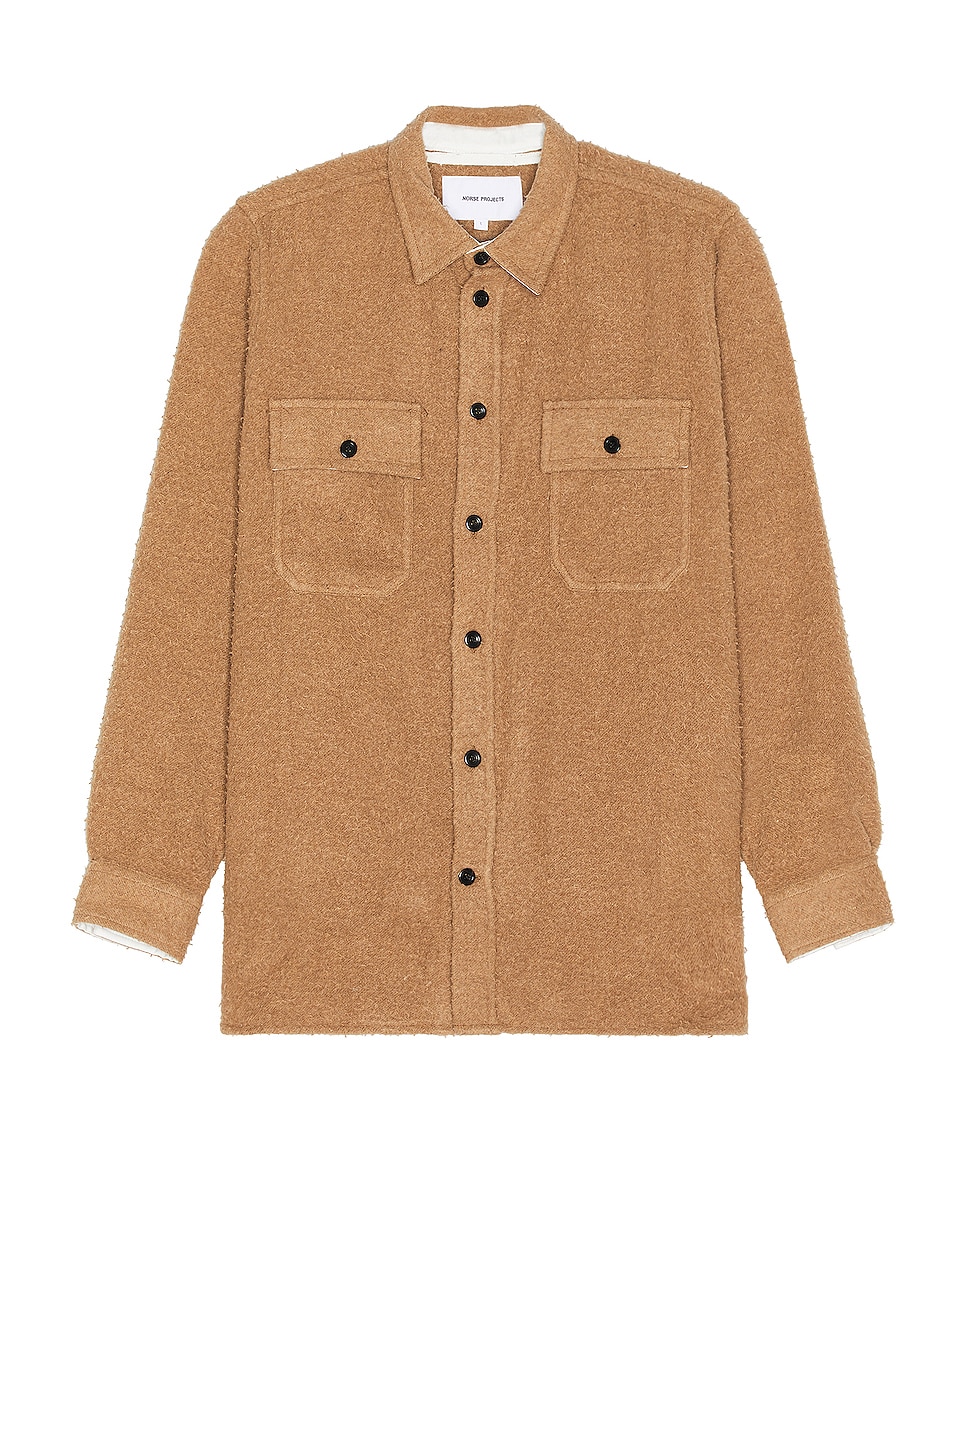 Image 1 of Norse Projects Silas Textured Cotton Wool Overshirt in Camel